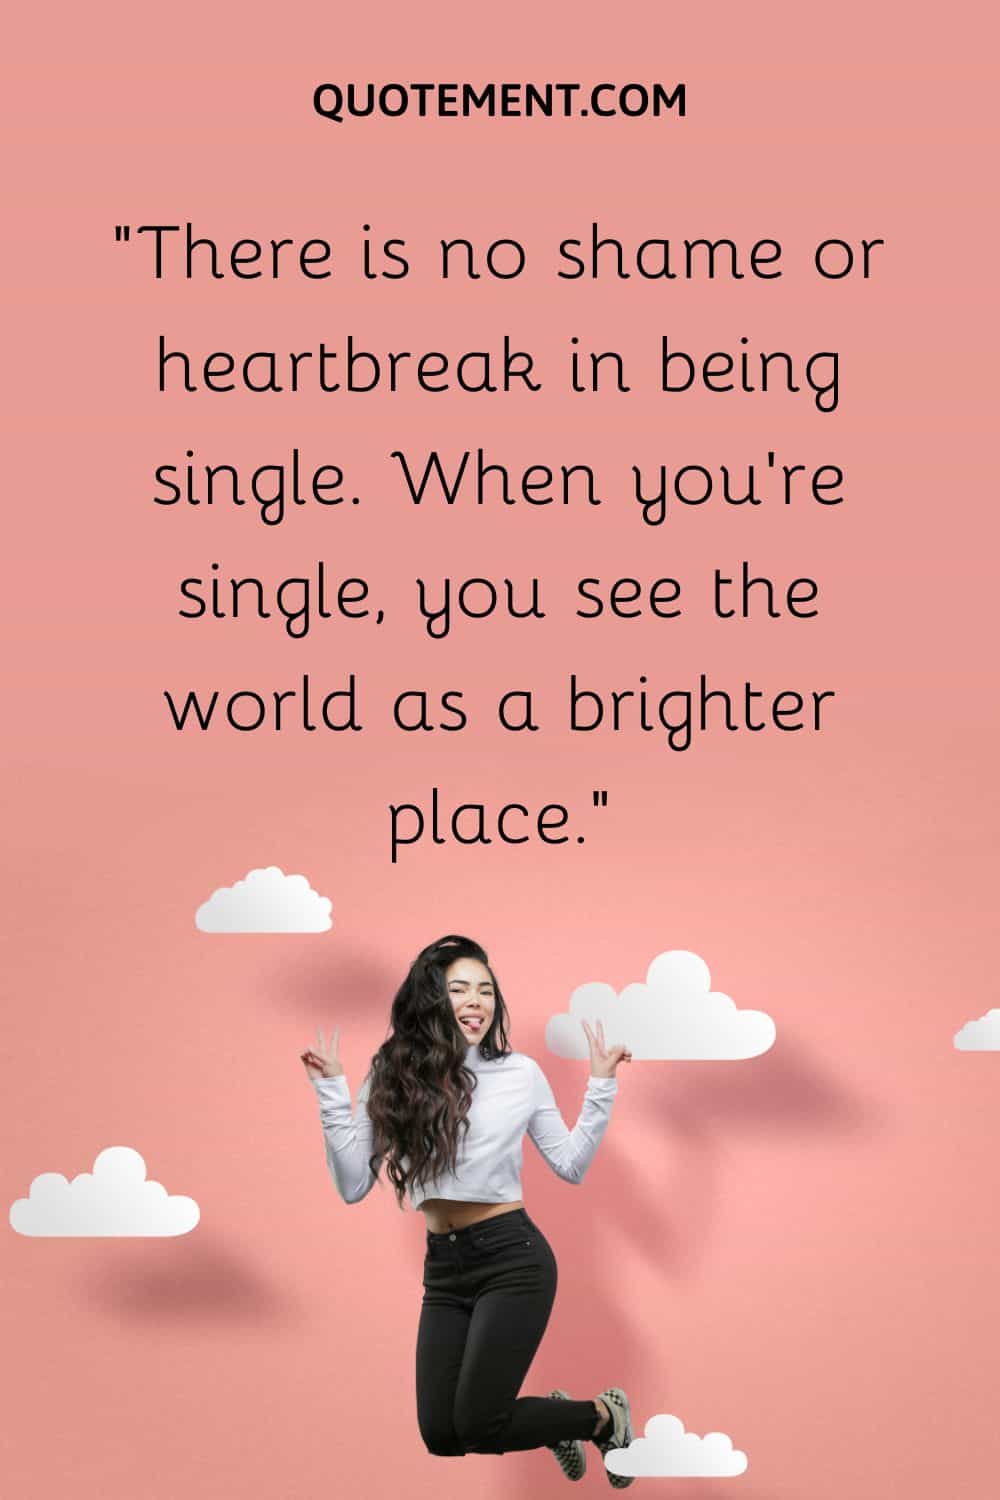 There is no shame or heartbreak in being single.